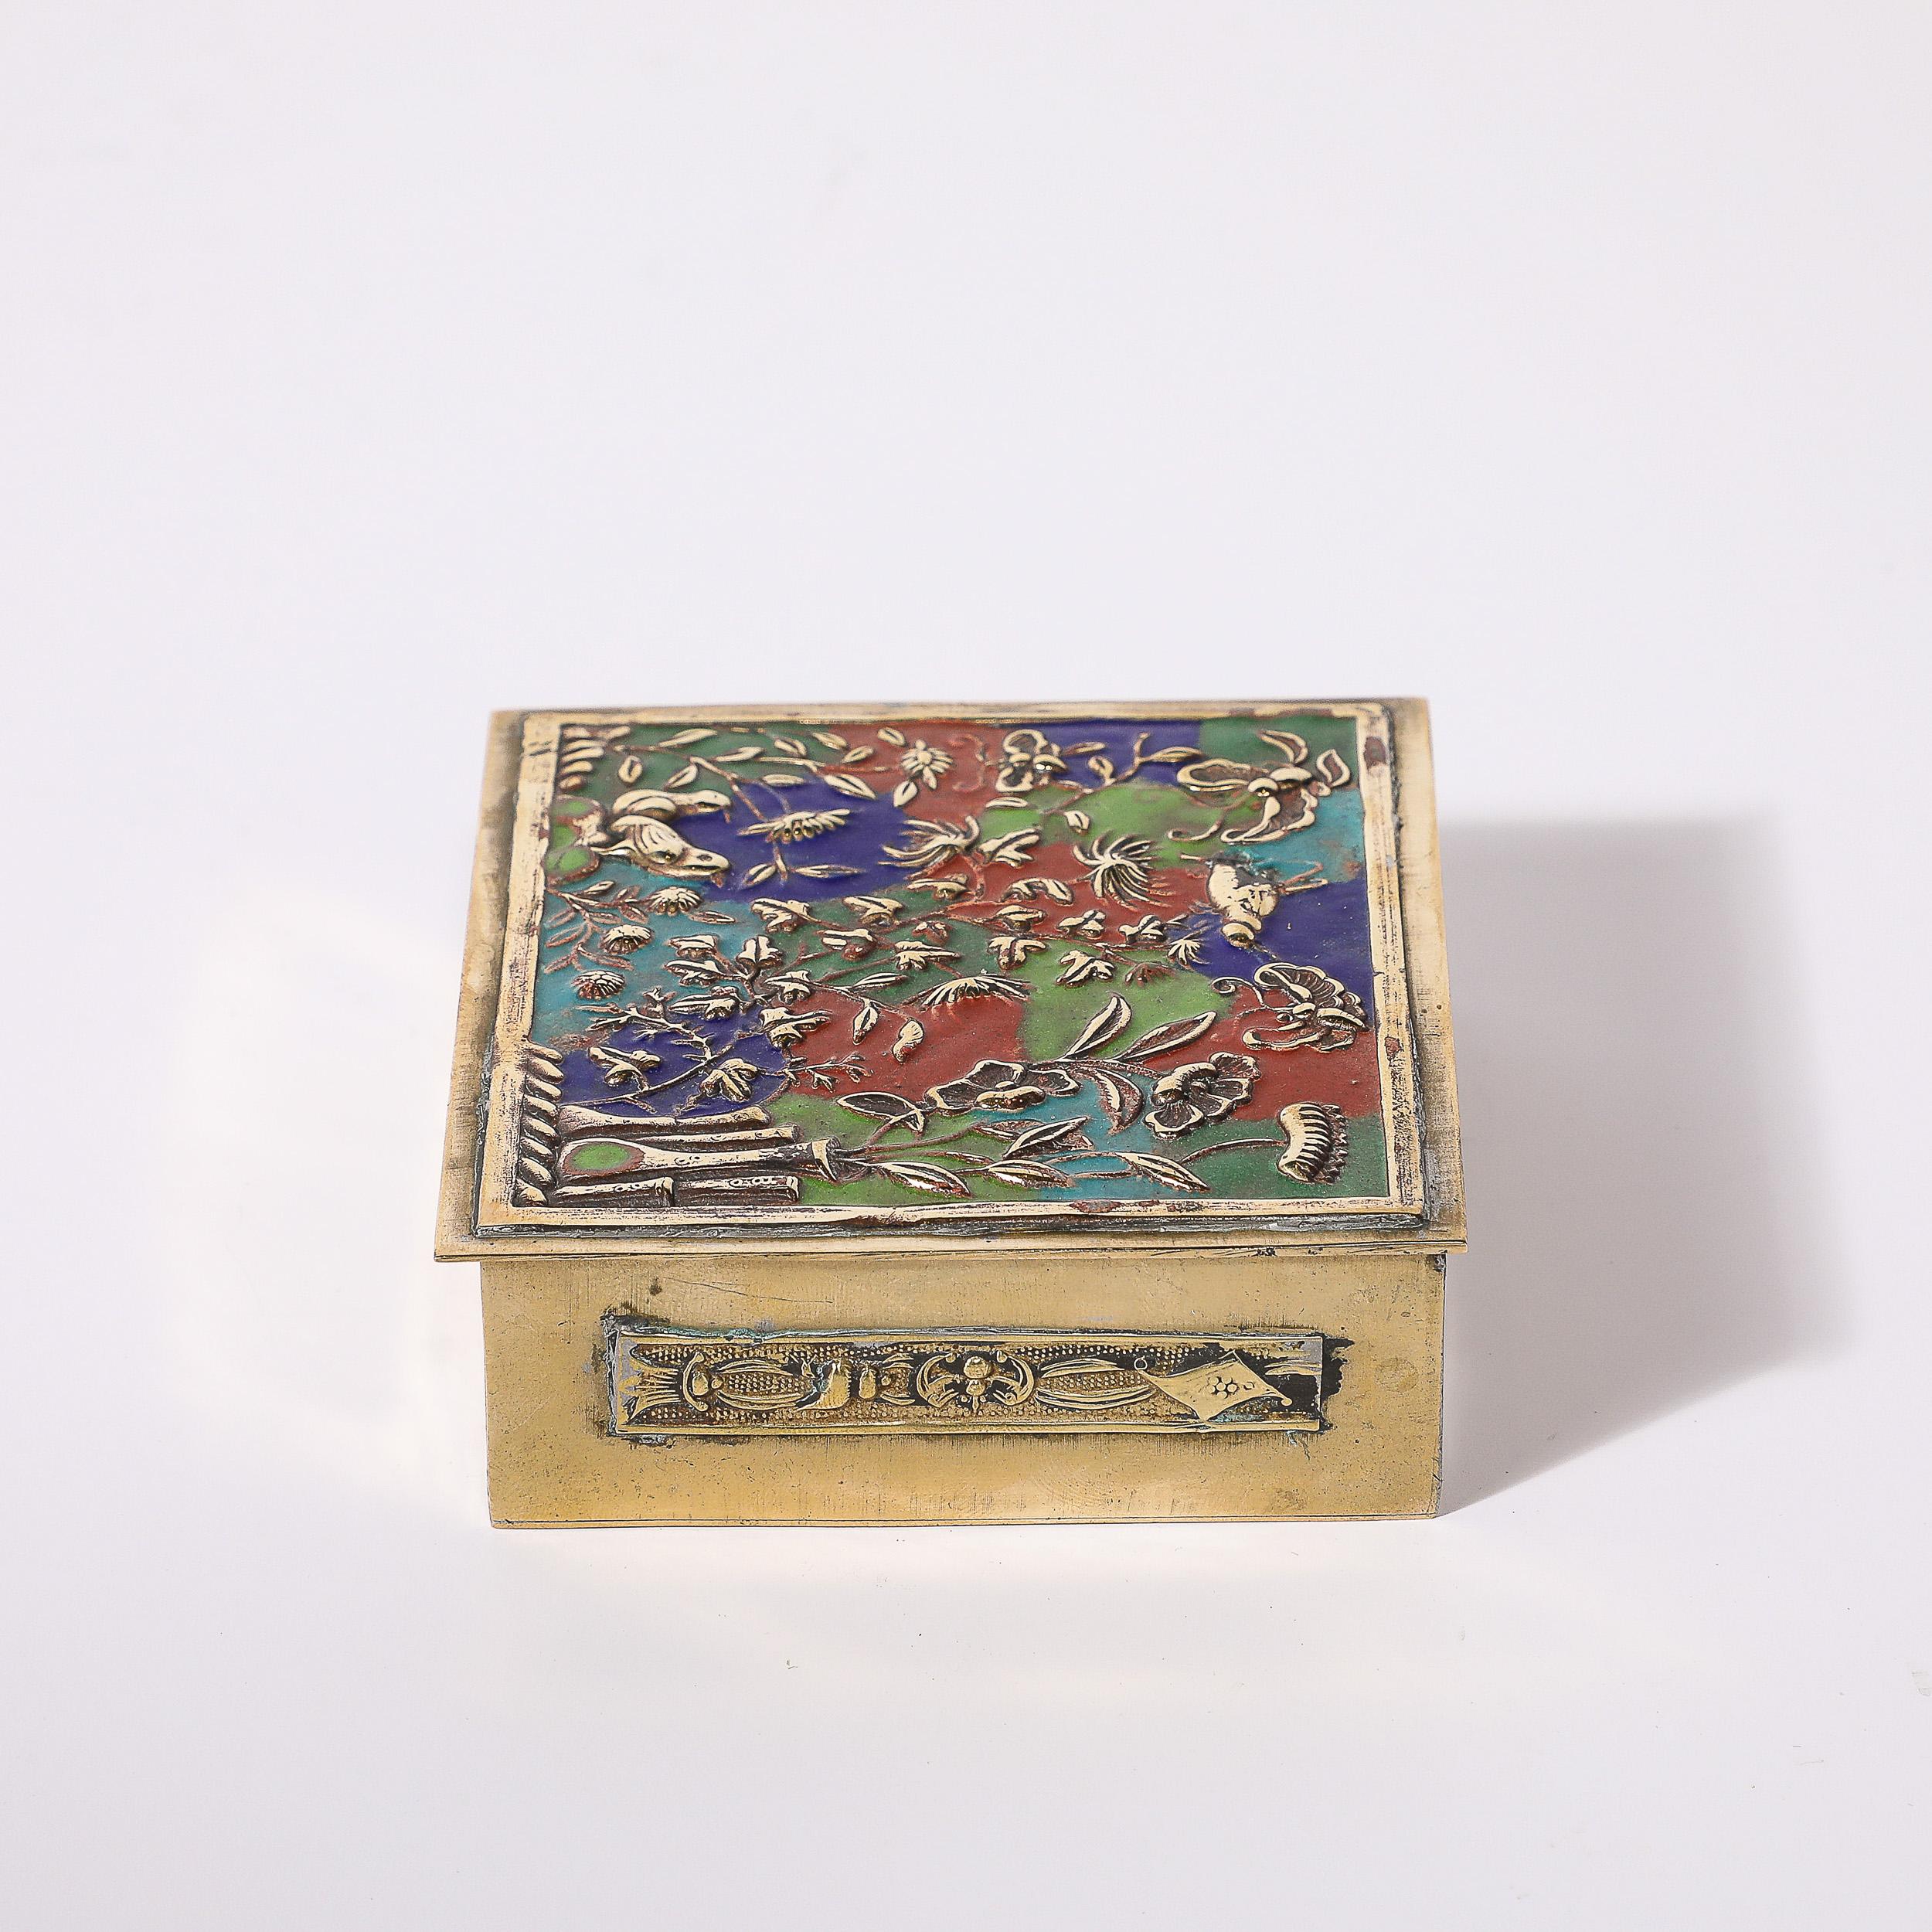 This exquisitely detailed and beautifully achieved Art Deco Brass and Enamel Box W/ Naturalist Imagery in Relief Cloisonne originates from Japan, Circa 1930. Features a top composed of raised relief naturalist imagery in brass lined with multicolor